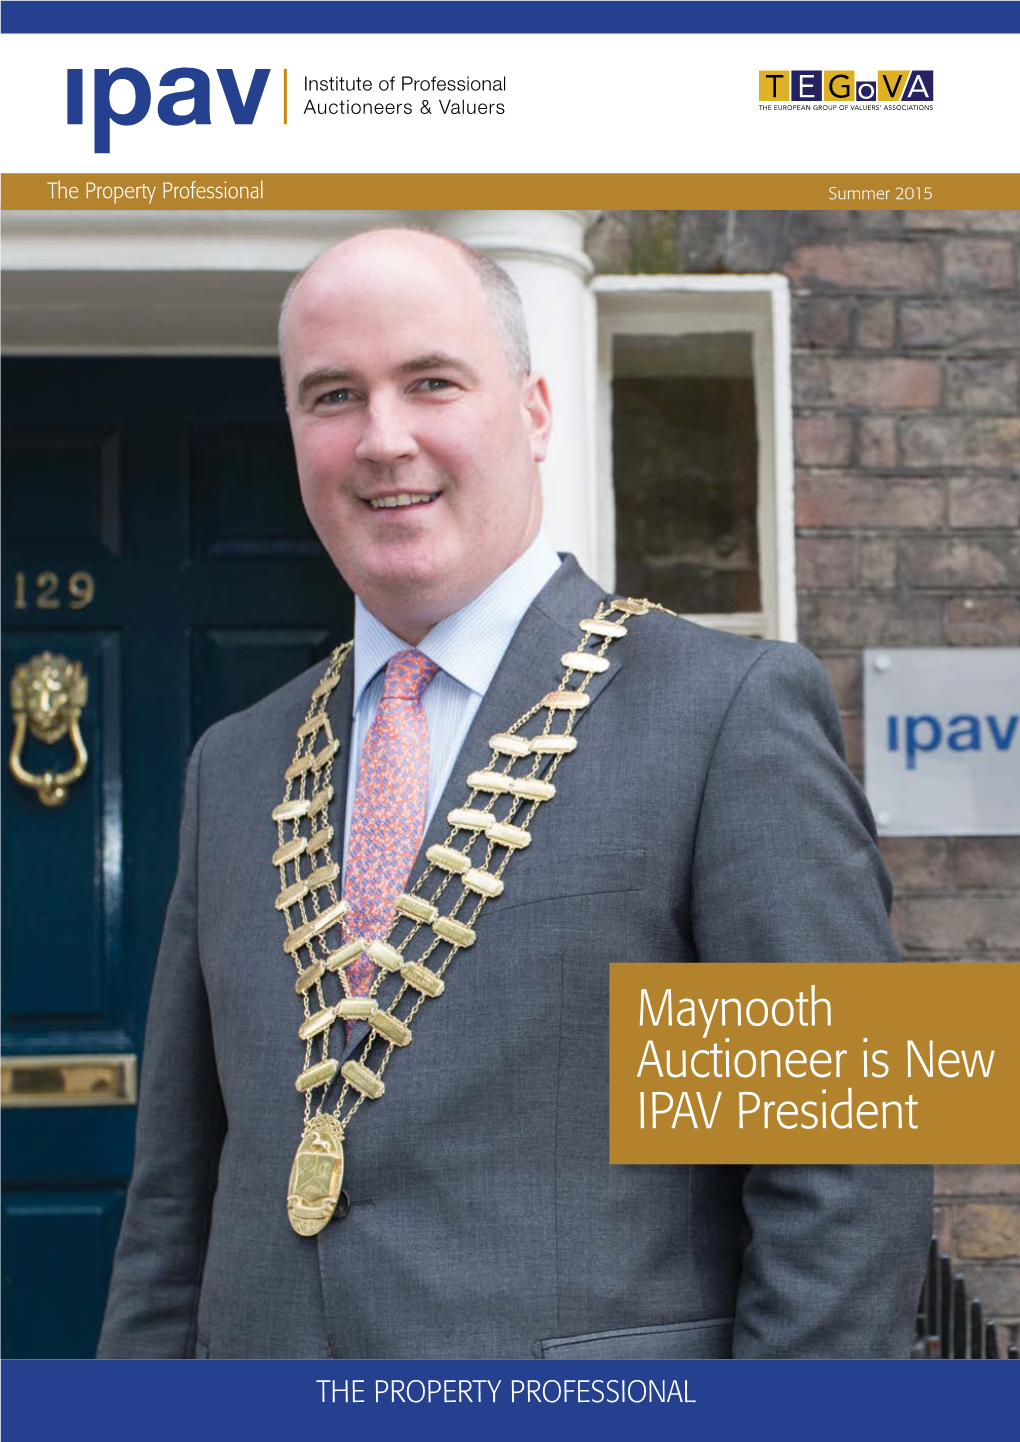 Maynooth Auctioneer Is New IPAV President